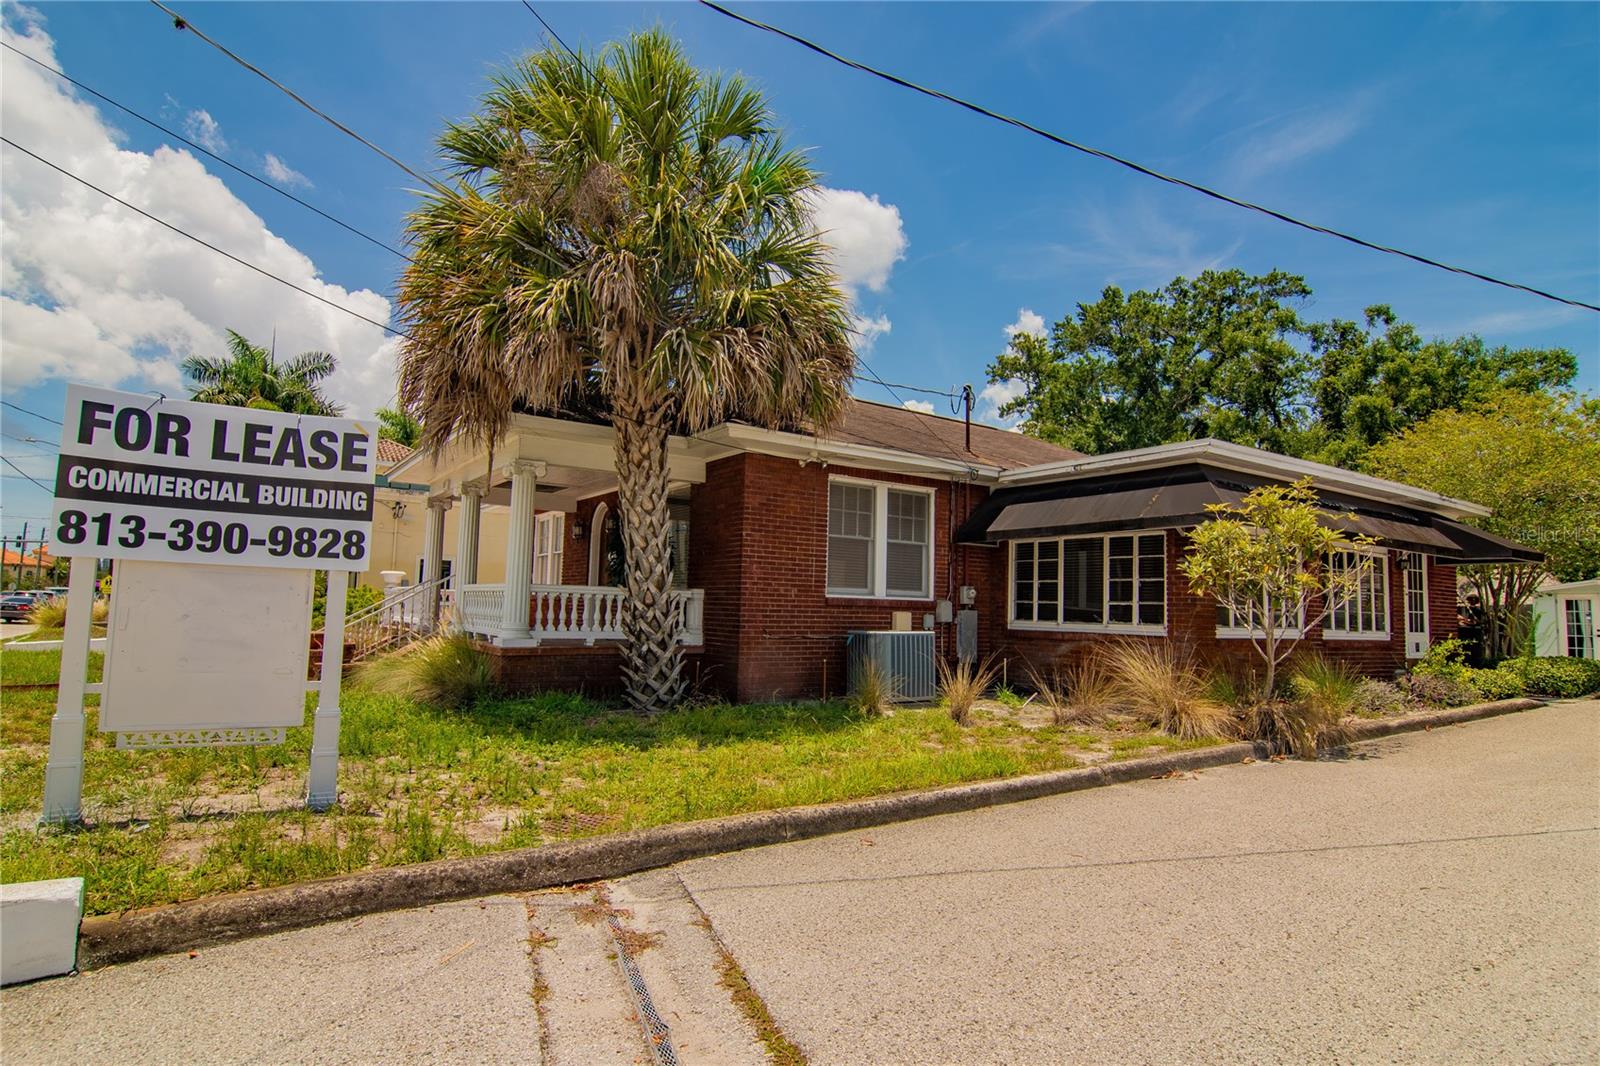 Photo of 301 S MACDILL AVE, TAMPA, FL 33609